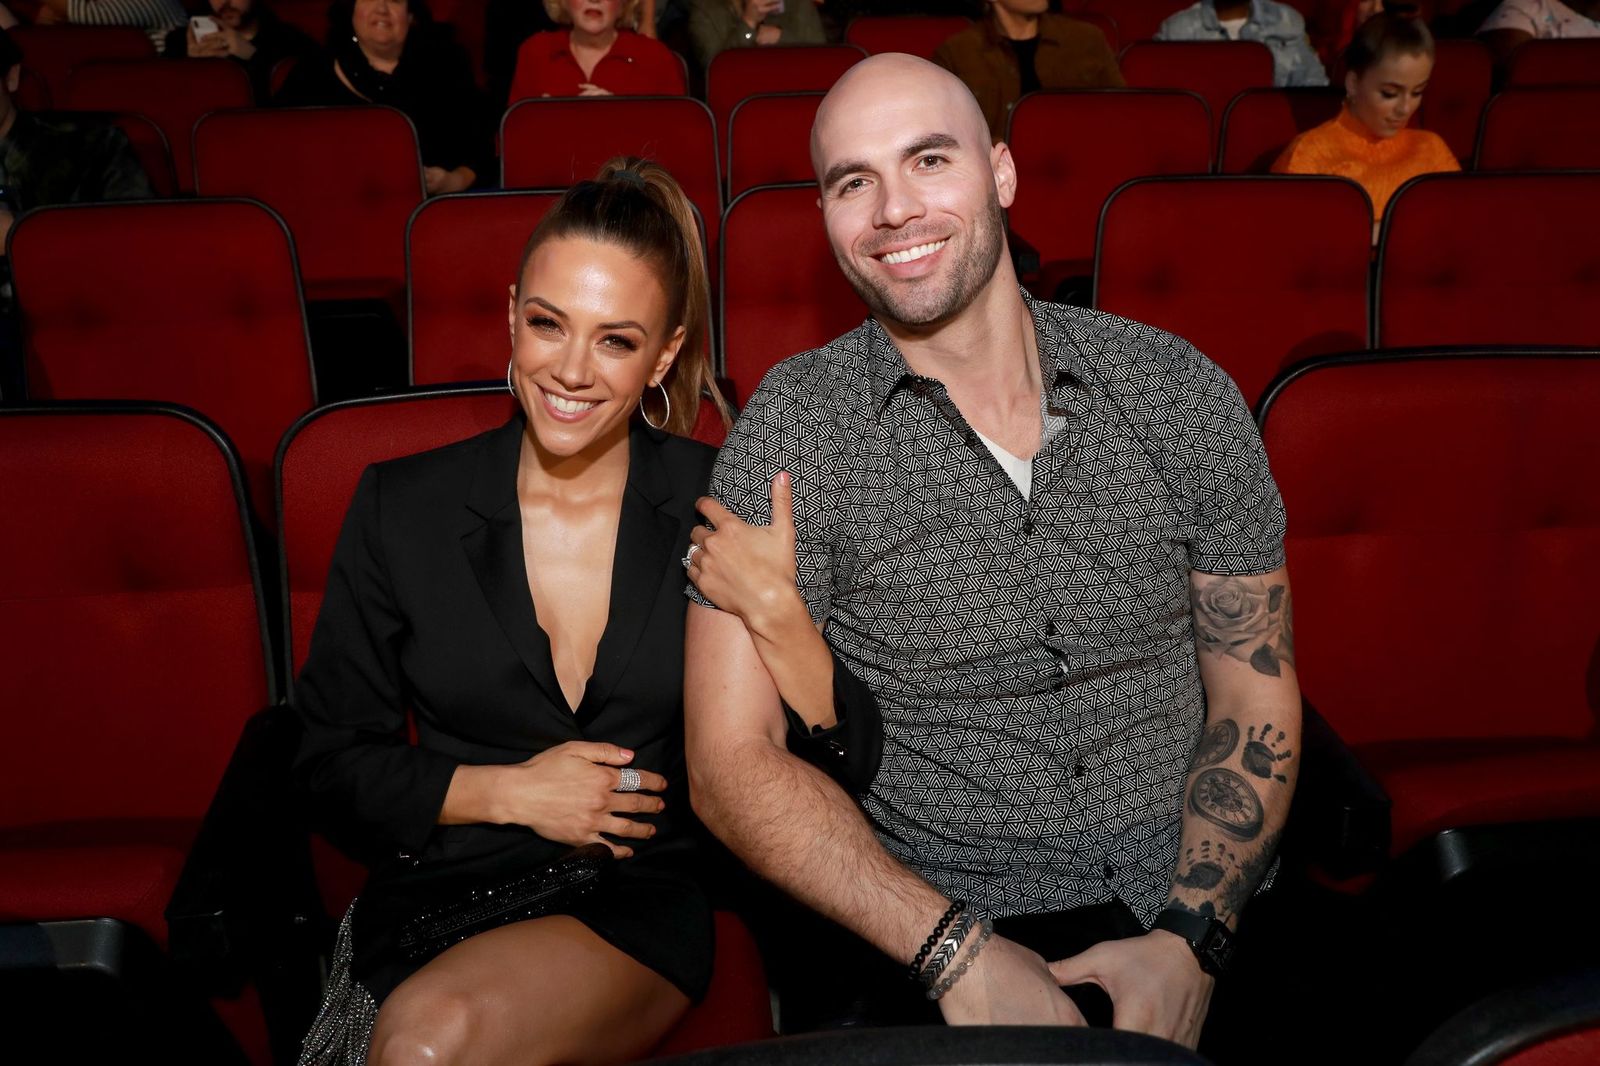 Jana Kramer and Mike Caussin attend the 2019 iHeartRadio Music Awards on March 14, 2019. | Getty Images